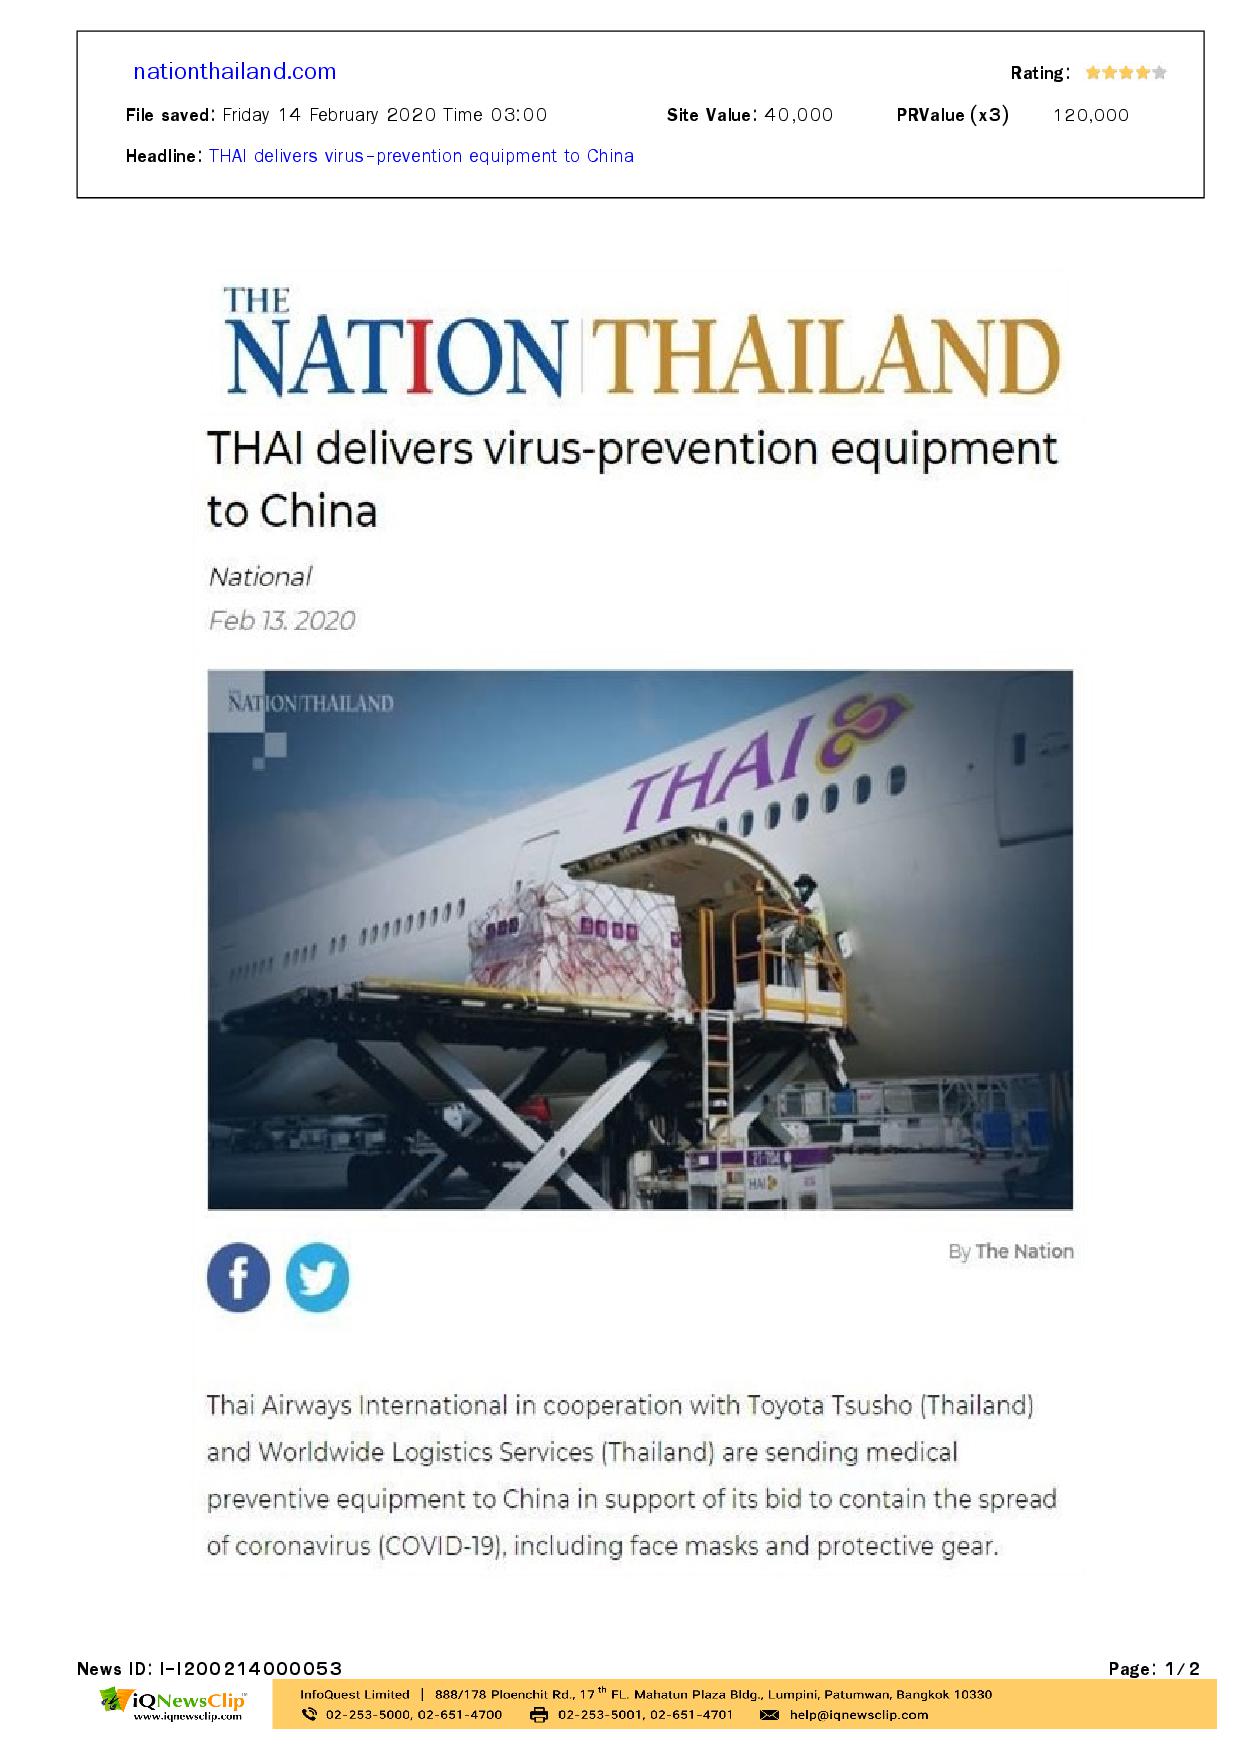 THAI delivers virus-prevention equipment to China